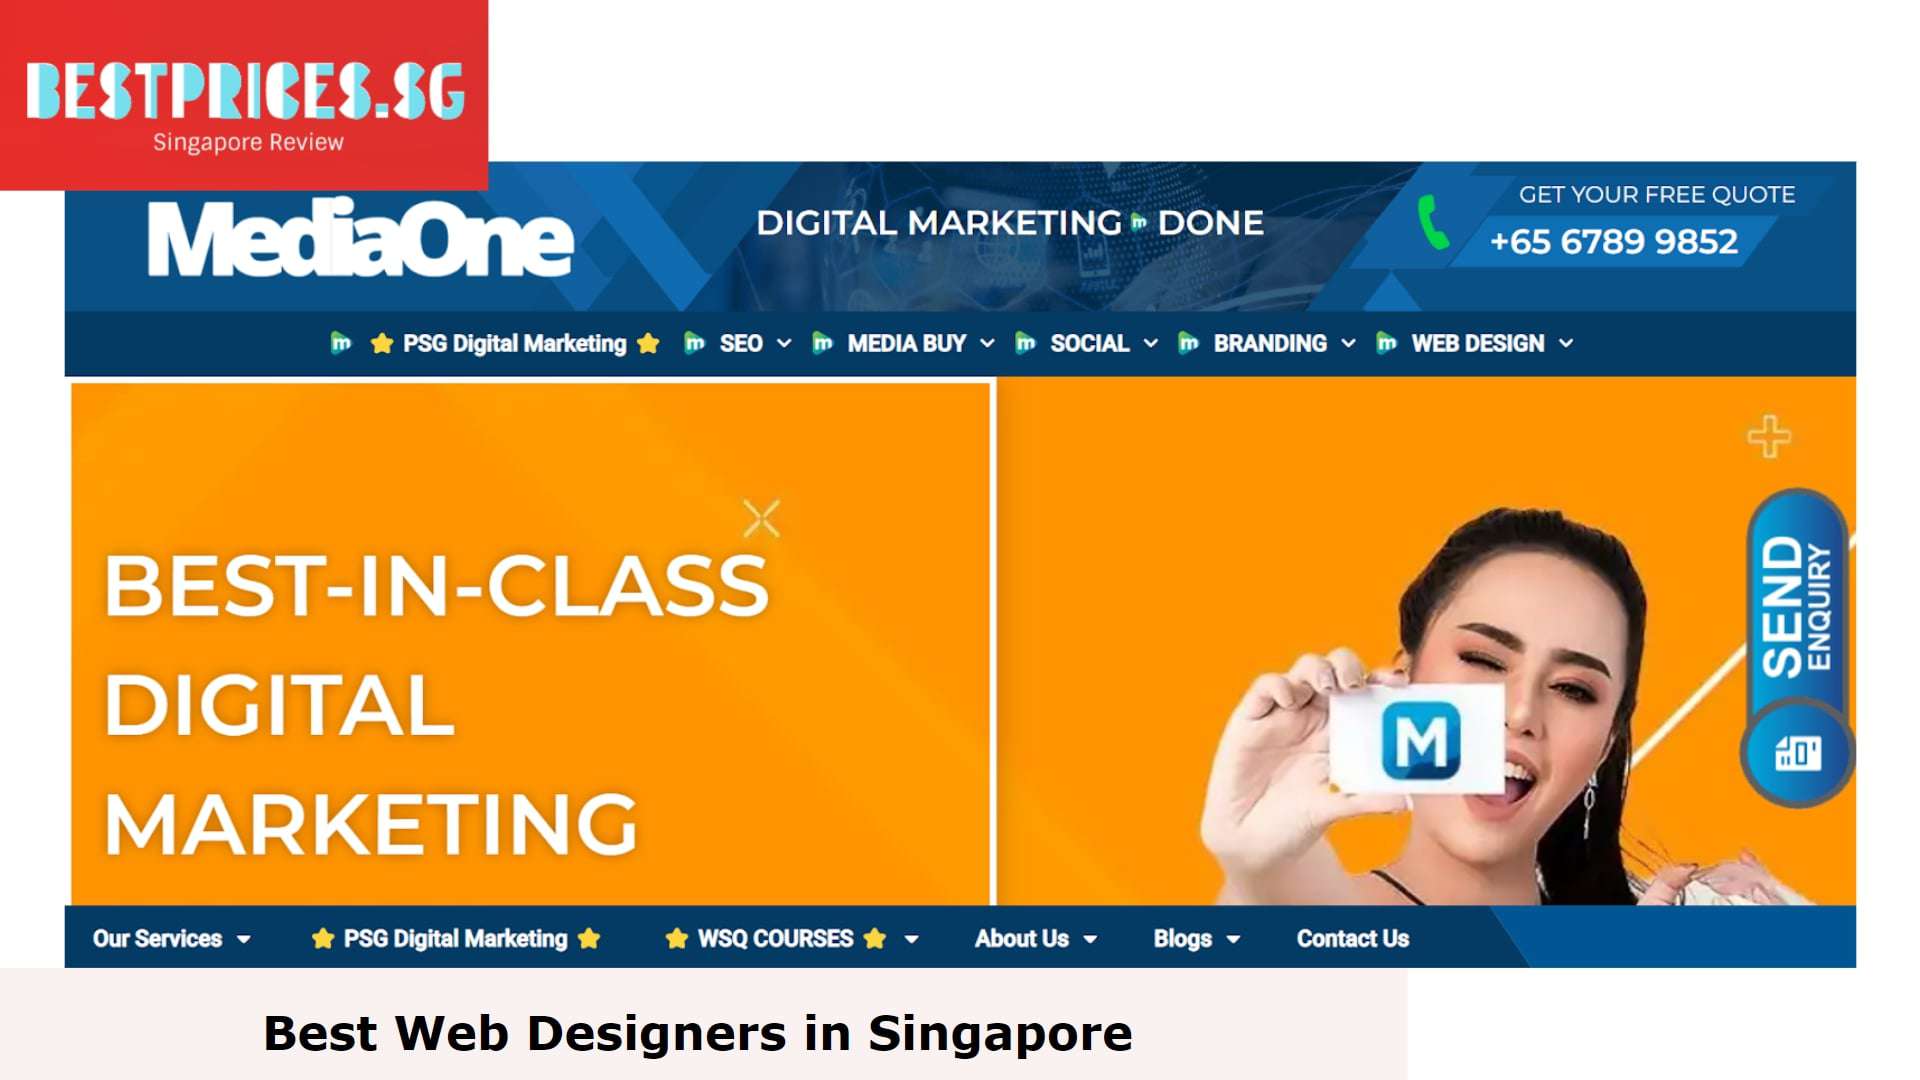 MediaOne Digital - Web Designers Singapore, web designer singapore, web designer singapore job, web designer singapore salary, freelance web designer singapore, website design singapore price, freelance web designer singapore forum, website design course singapore, web design services, web design company, How much does it cost to design a website in Singapore?, How much does a webpage designer cost?, Are web designers still in demand?, How much do web designers charge maintenance?, 